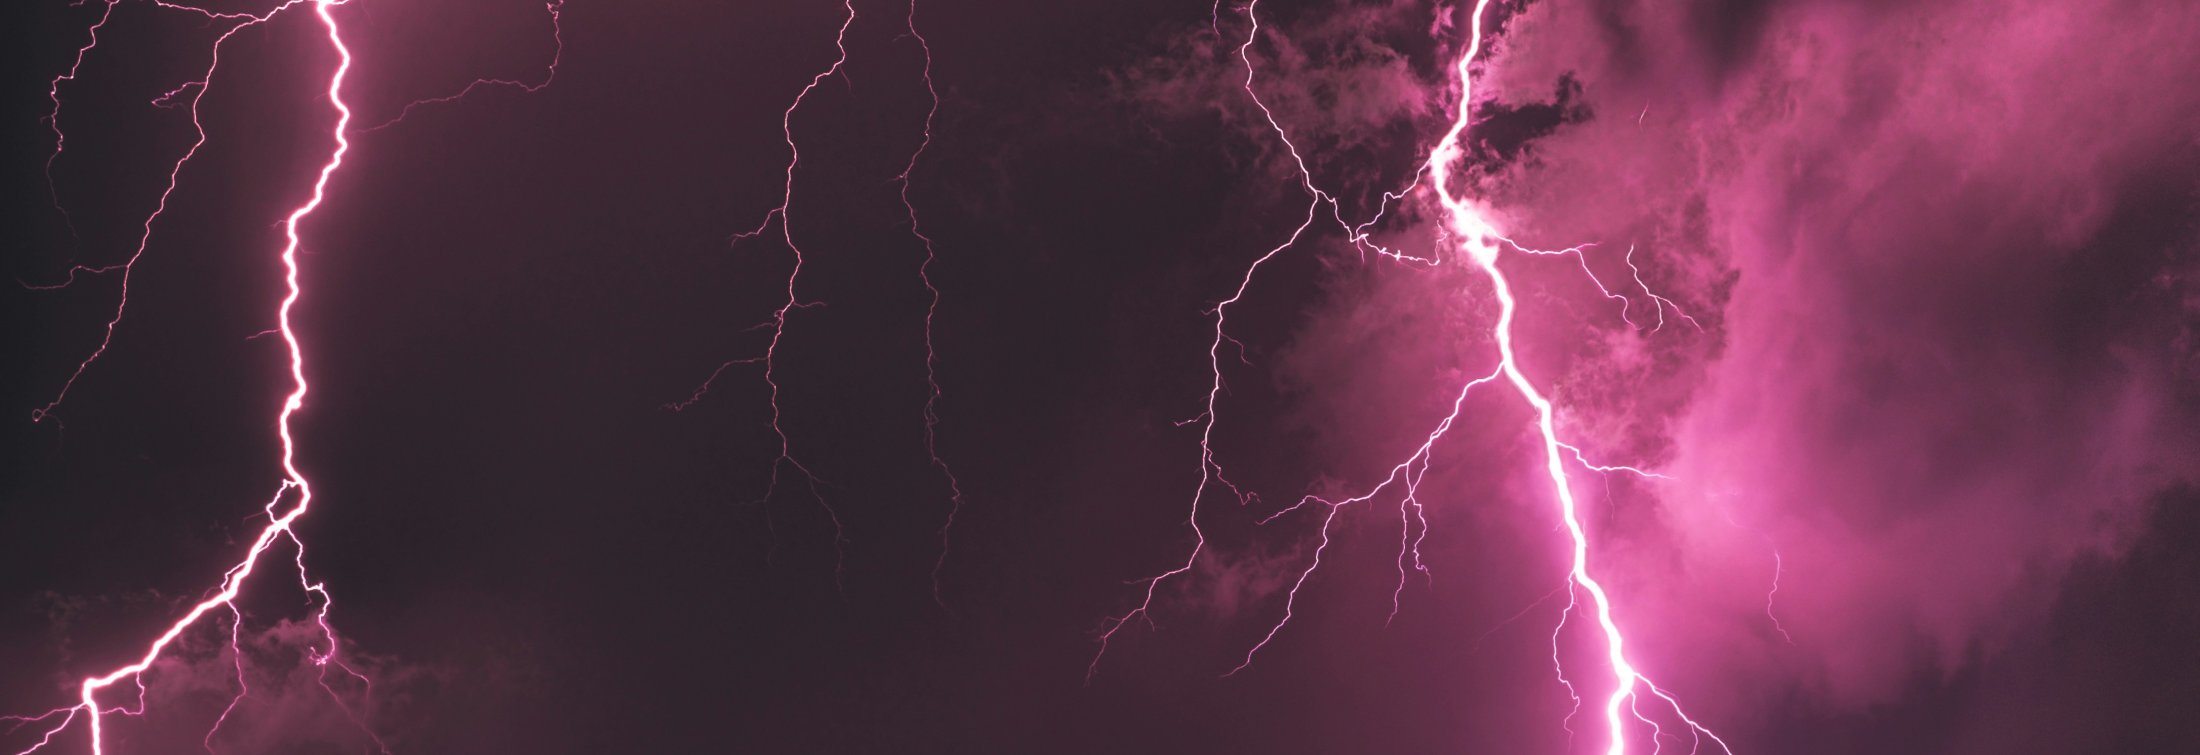 Purple sky filled with lightning